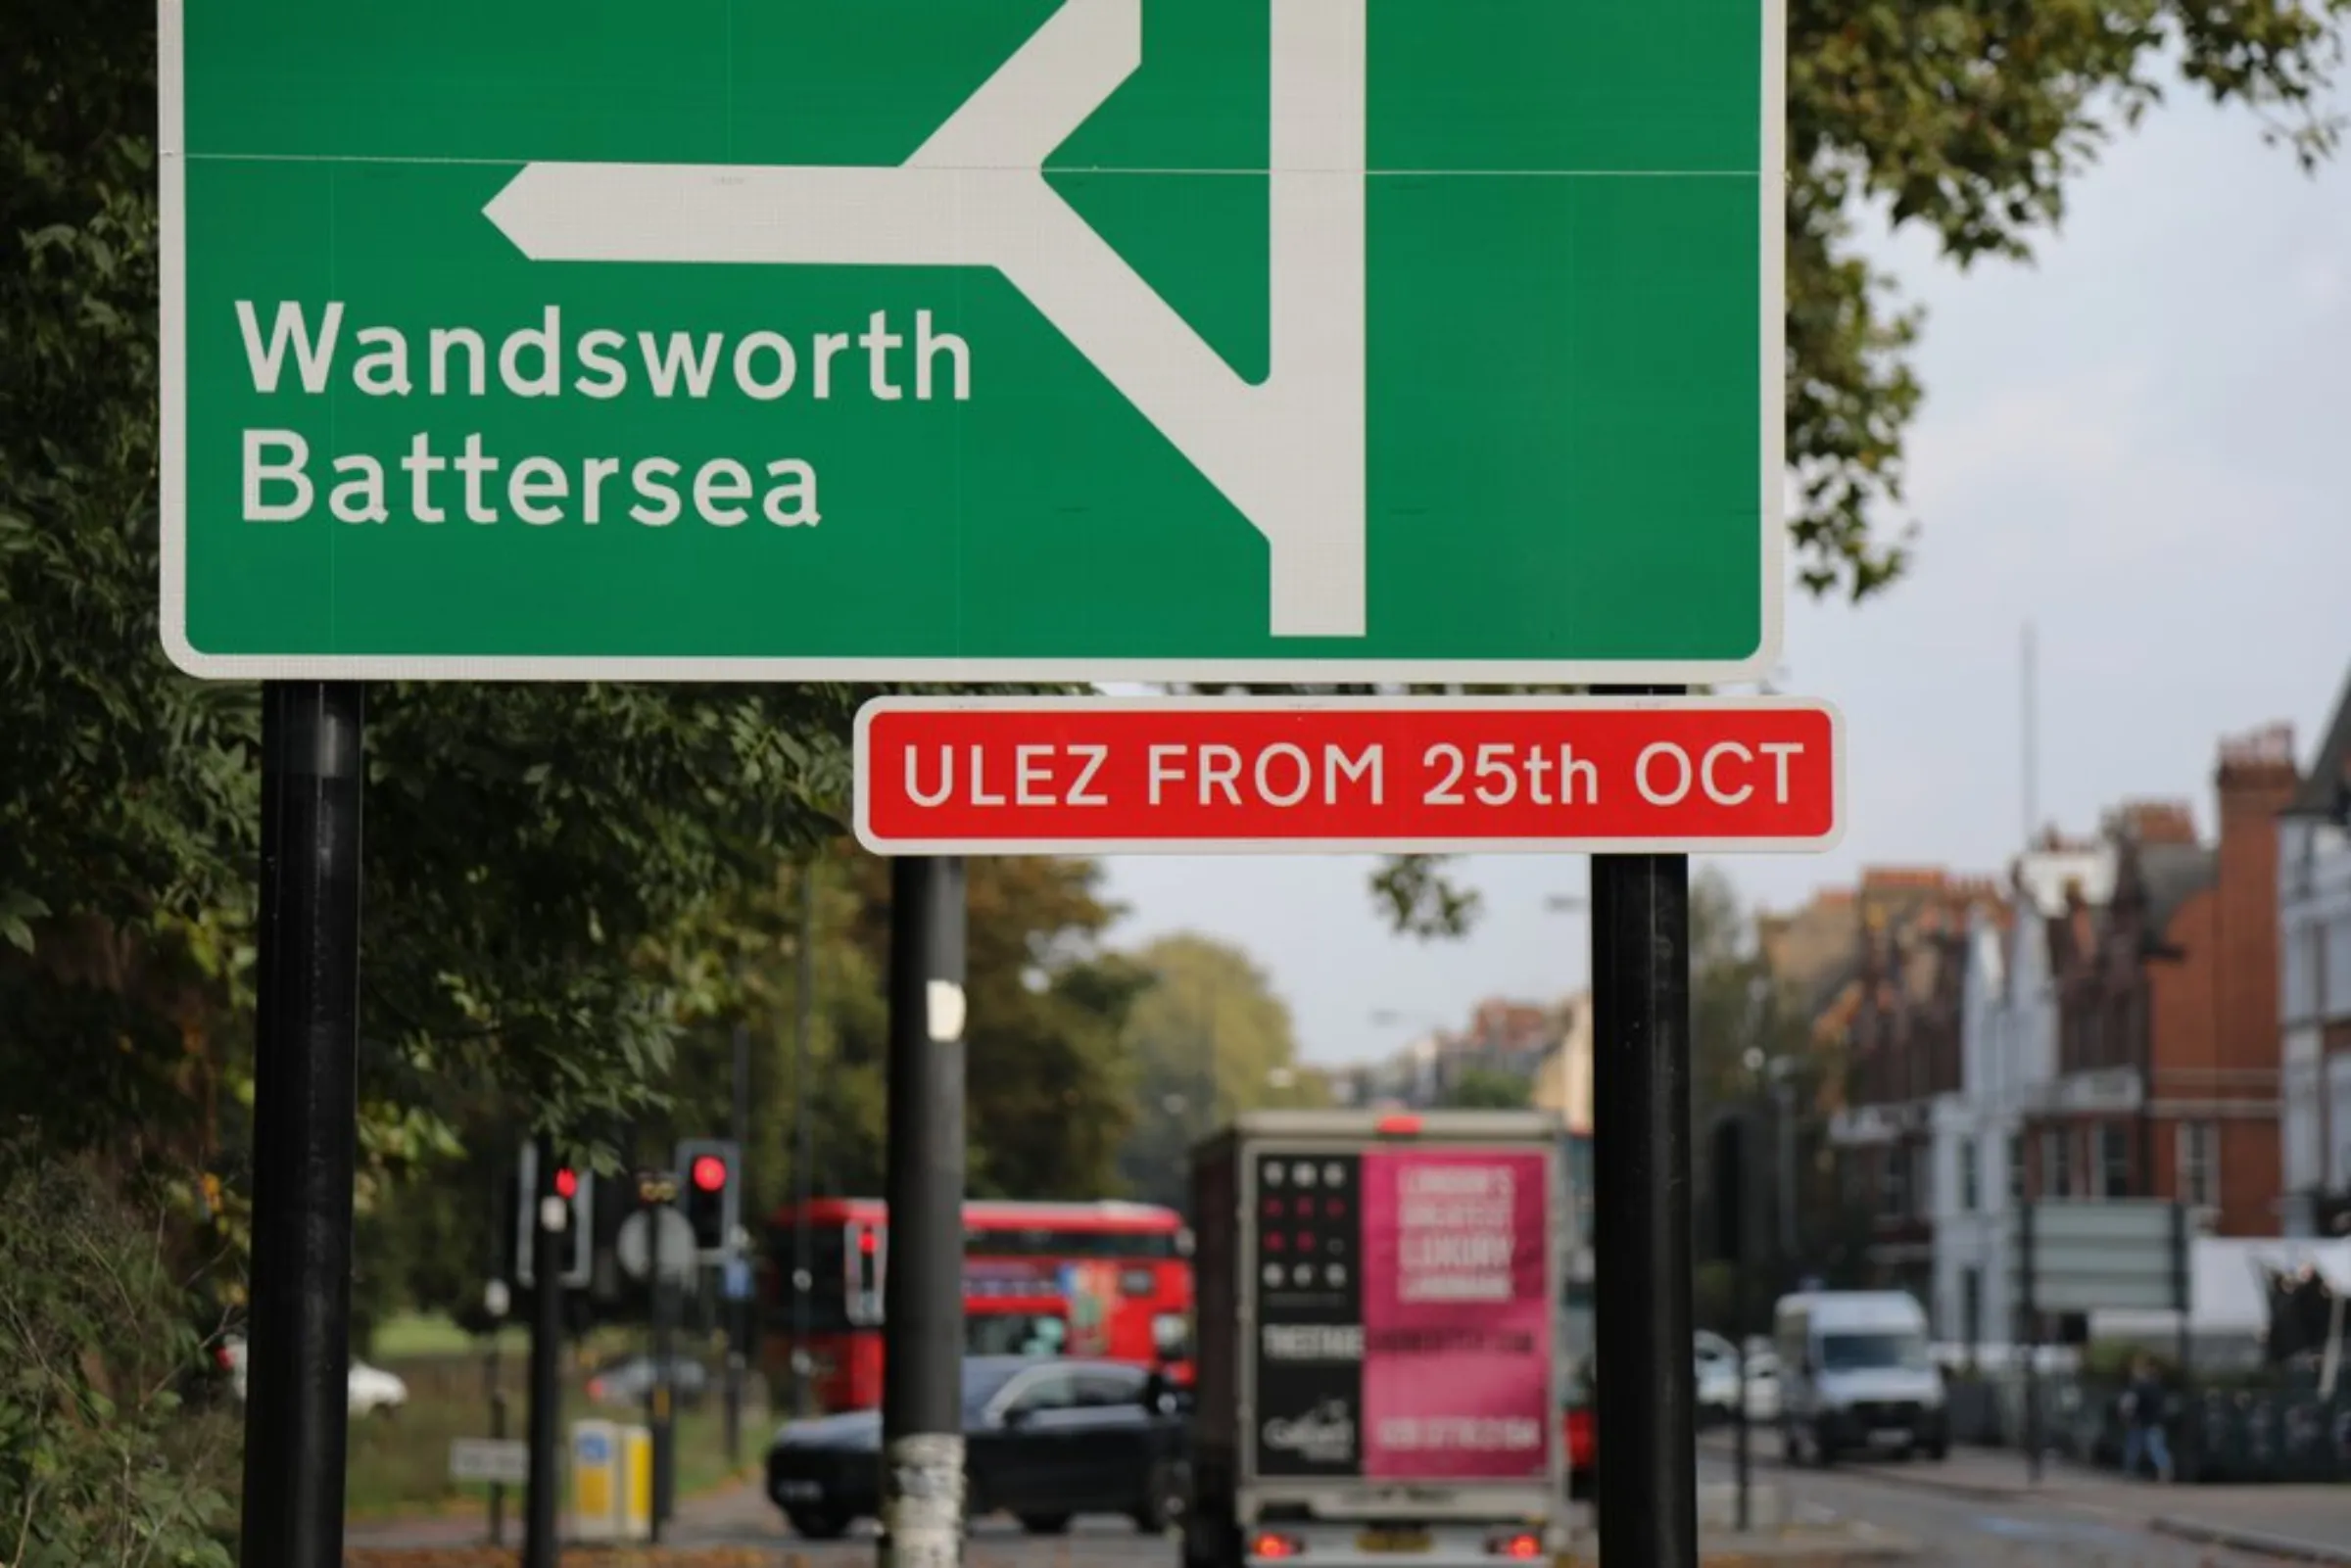 A sign advises drivers of an expansion of London’s Ultra Low Emissions Zone (ULEZ) which came into force on October 25, 2021. Vehicles not meeting ULEZ’s emission requirements face a daily charge of £12.50 for driving in the zone in London, England